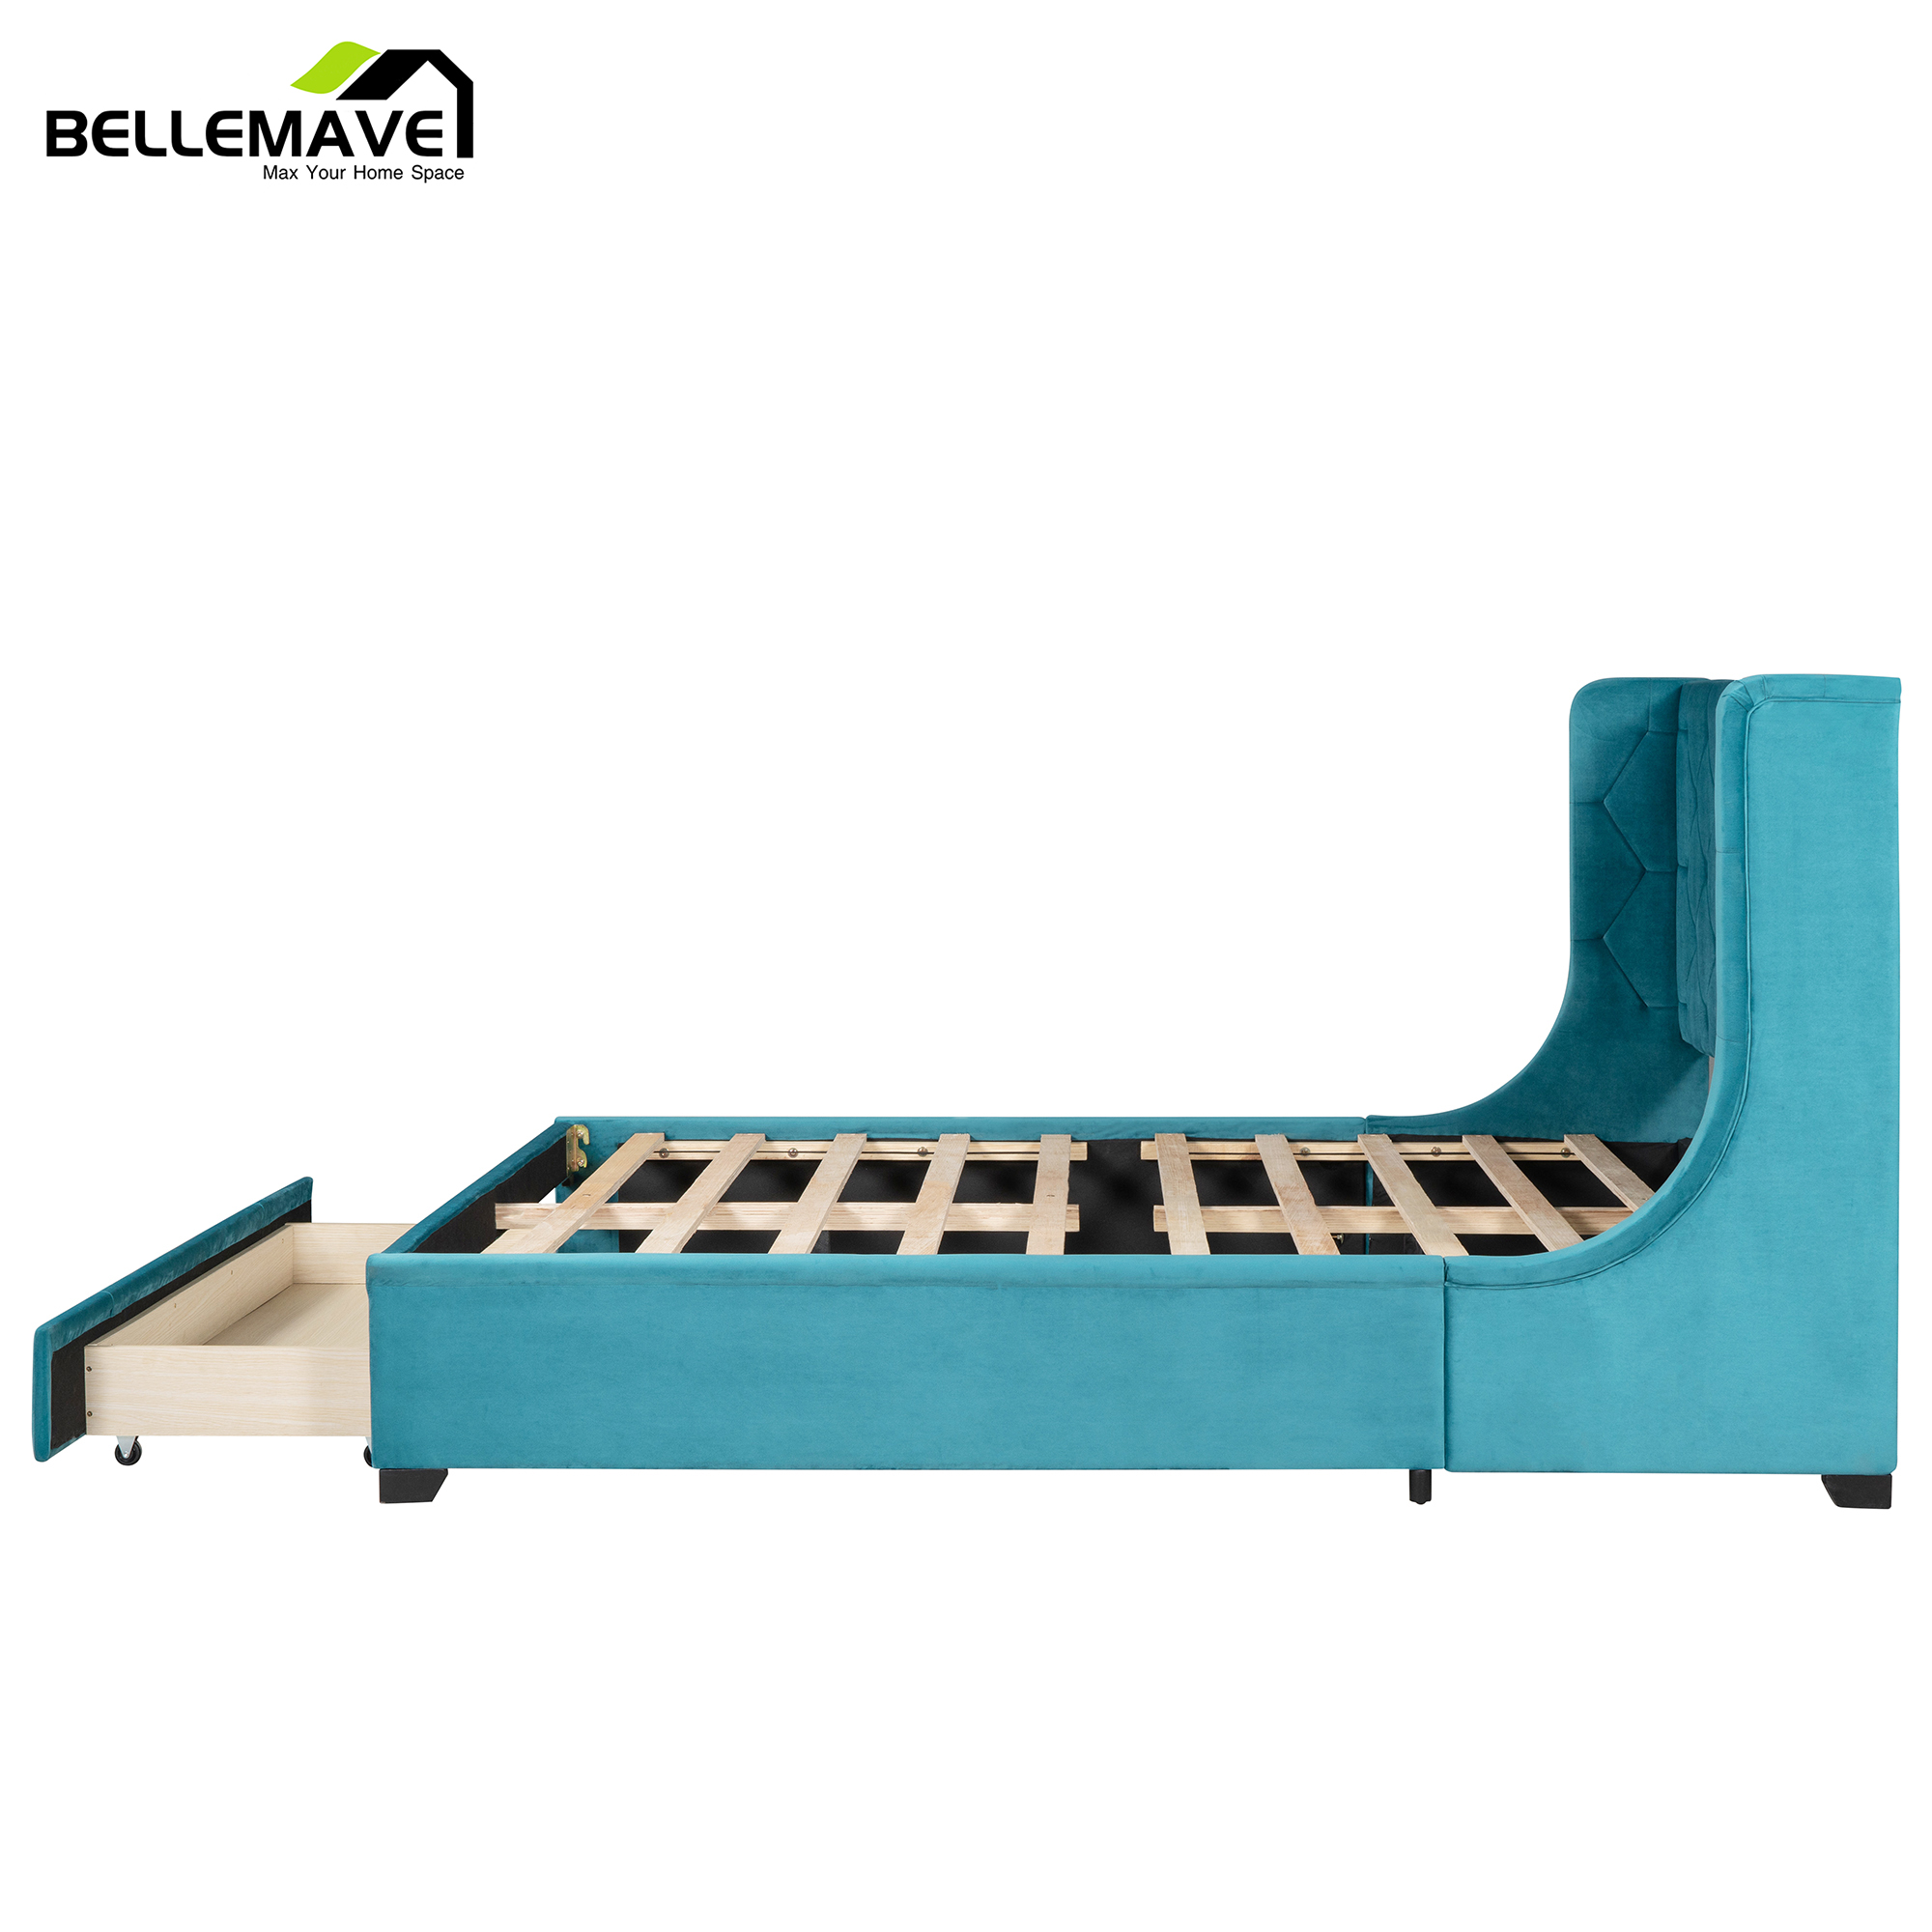 Bellemave Queen Upholstered Platform Bed Frame with Drawer, Storage Bed With Tufted Wingback Headboard, Blue - image 3 of 7